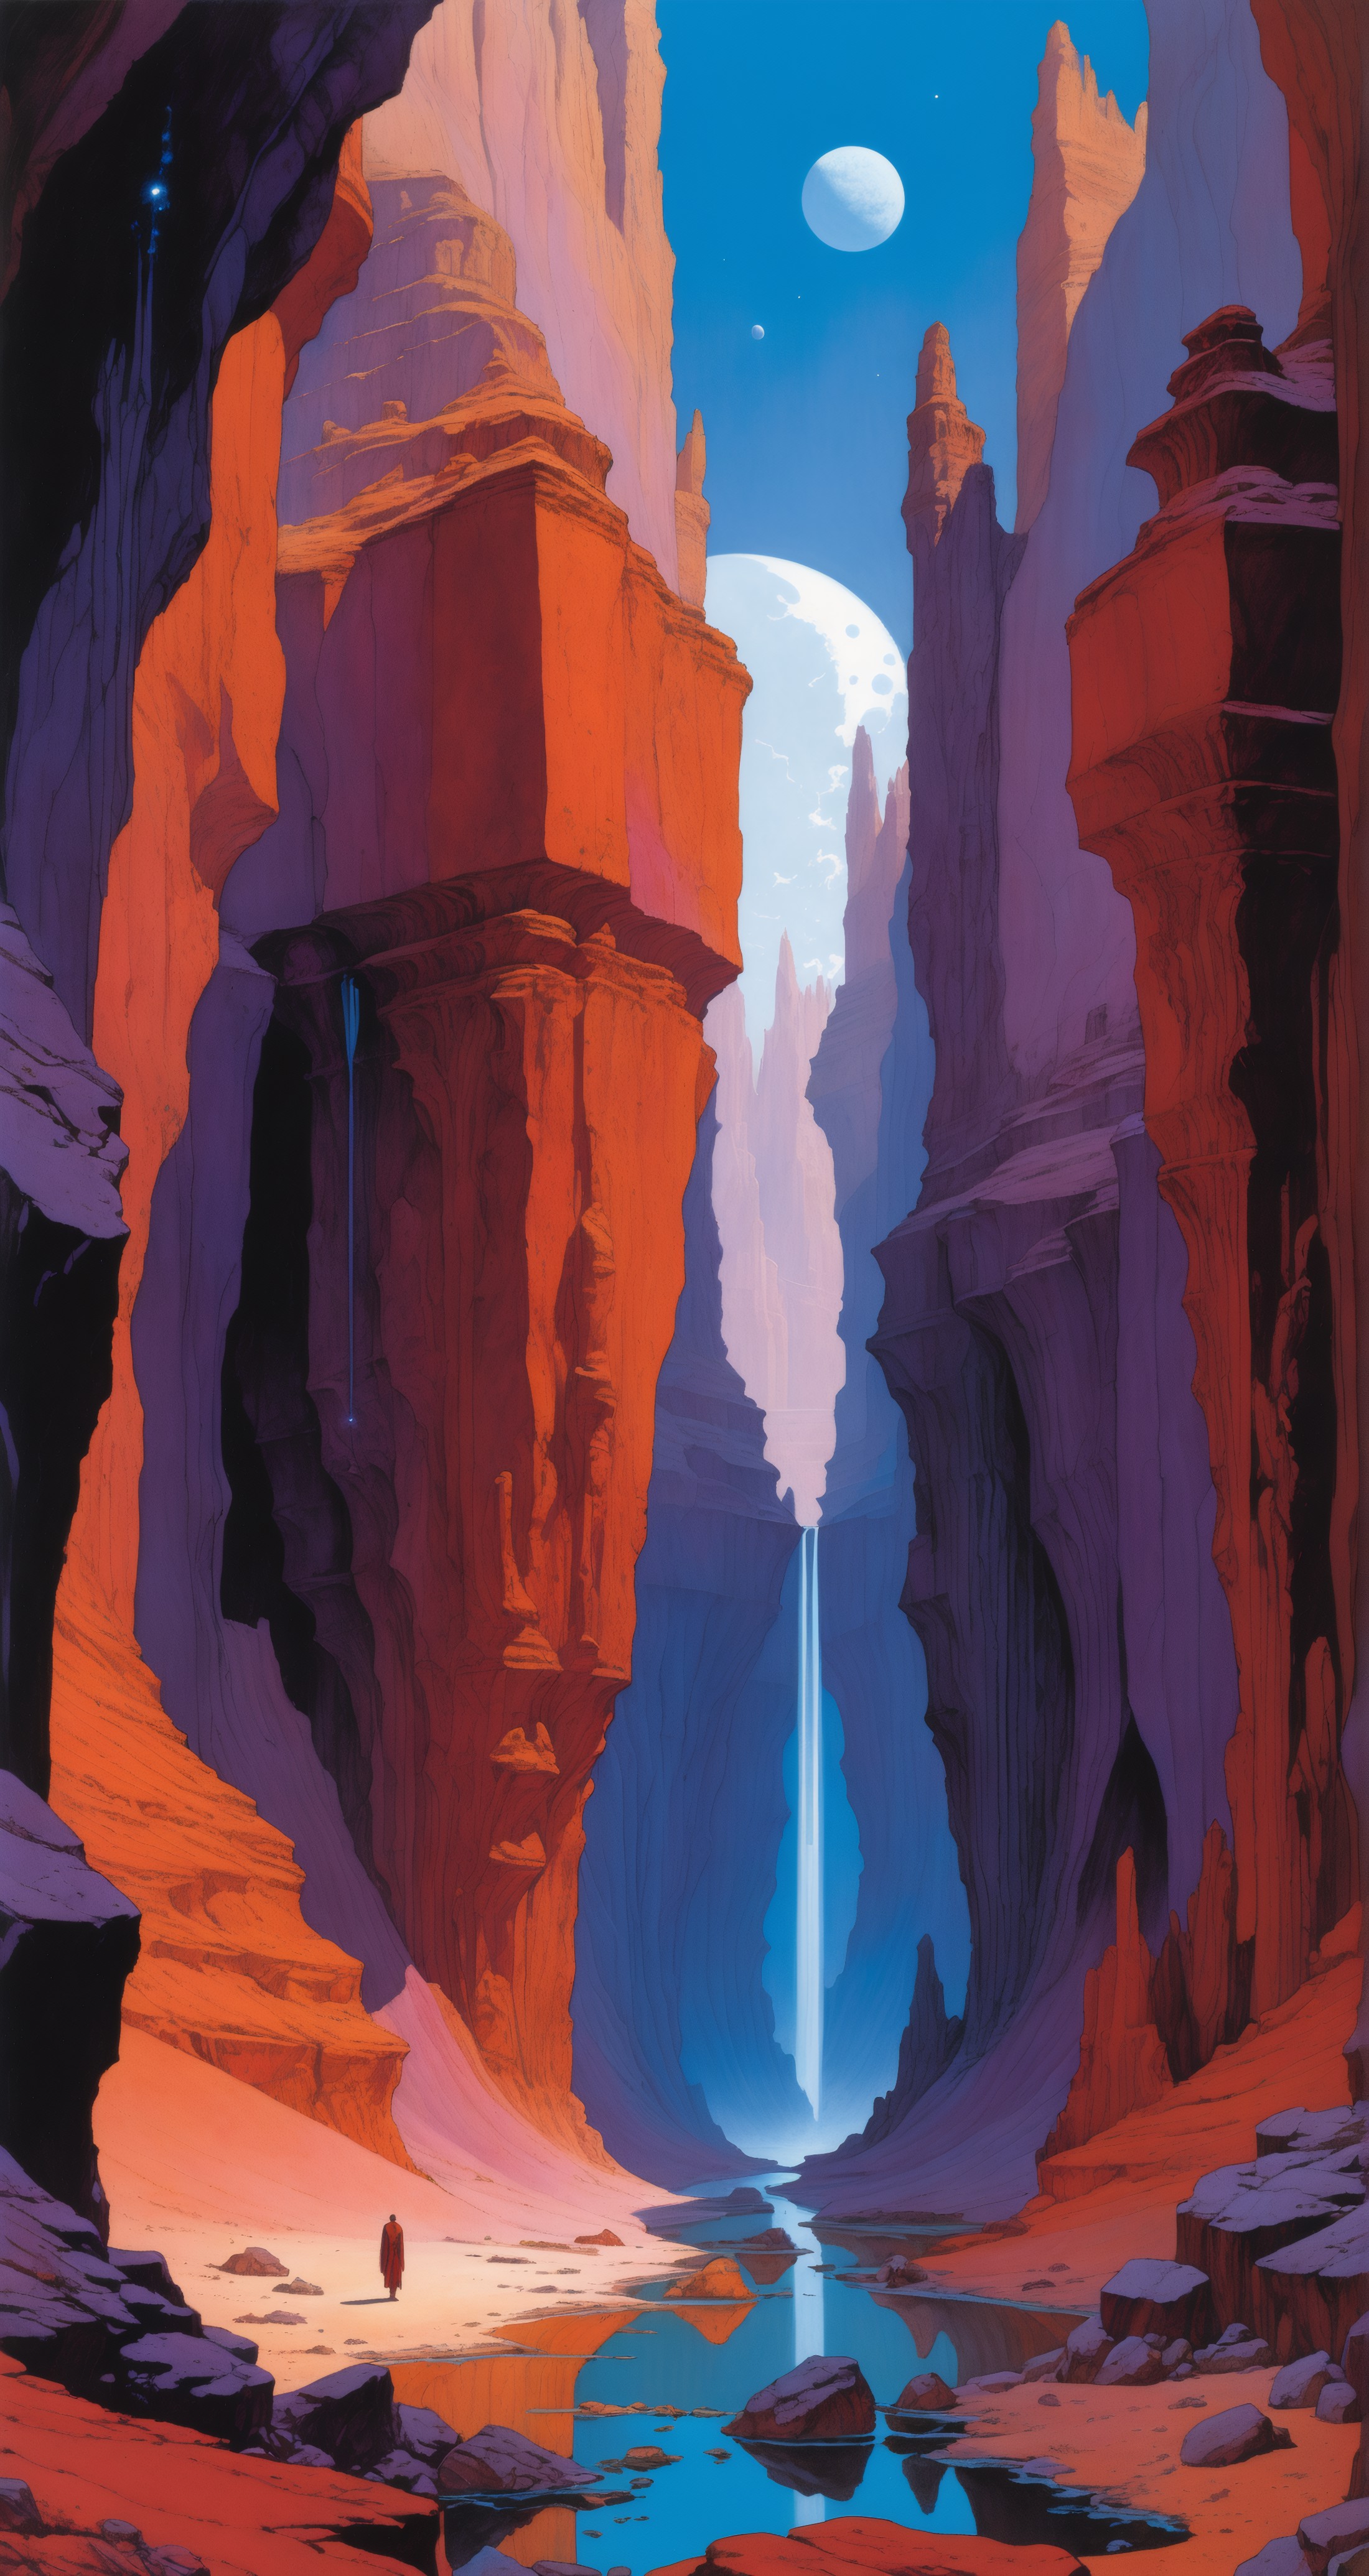 A towering red rock canyon with a waterfall cascading down into a serene pool below. Above, binary moons are visible hanging in the clear blue sky.